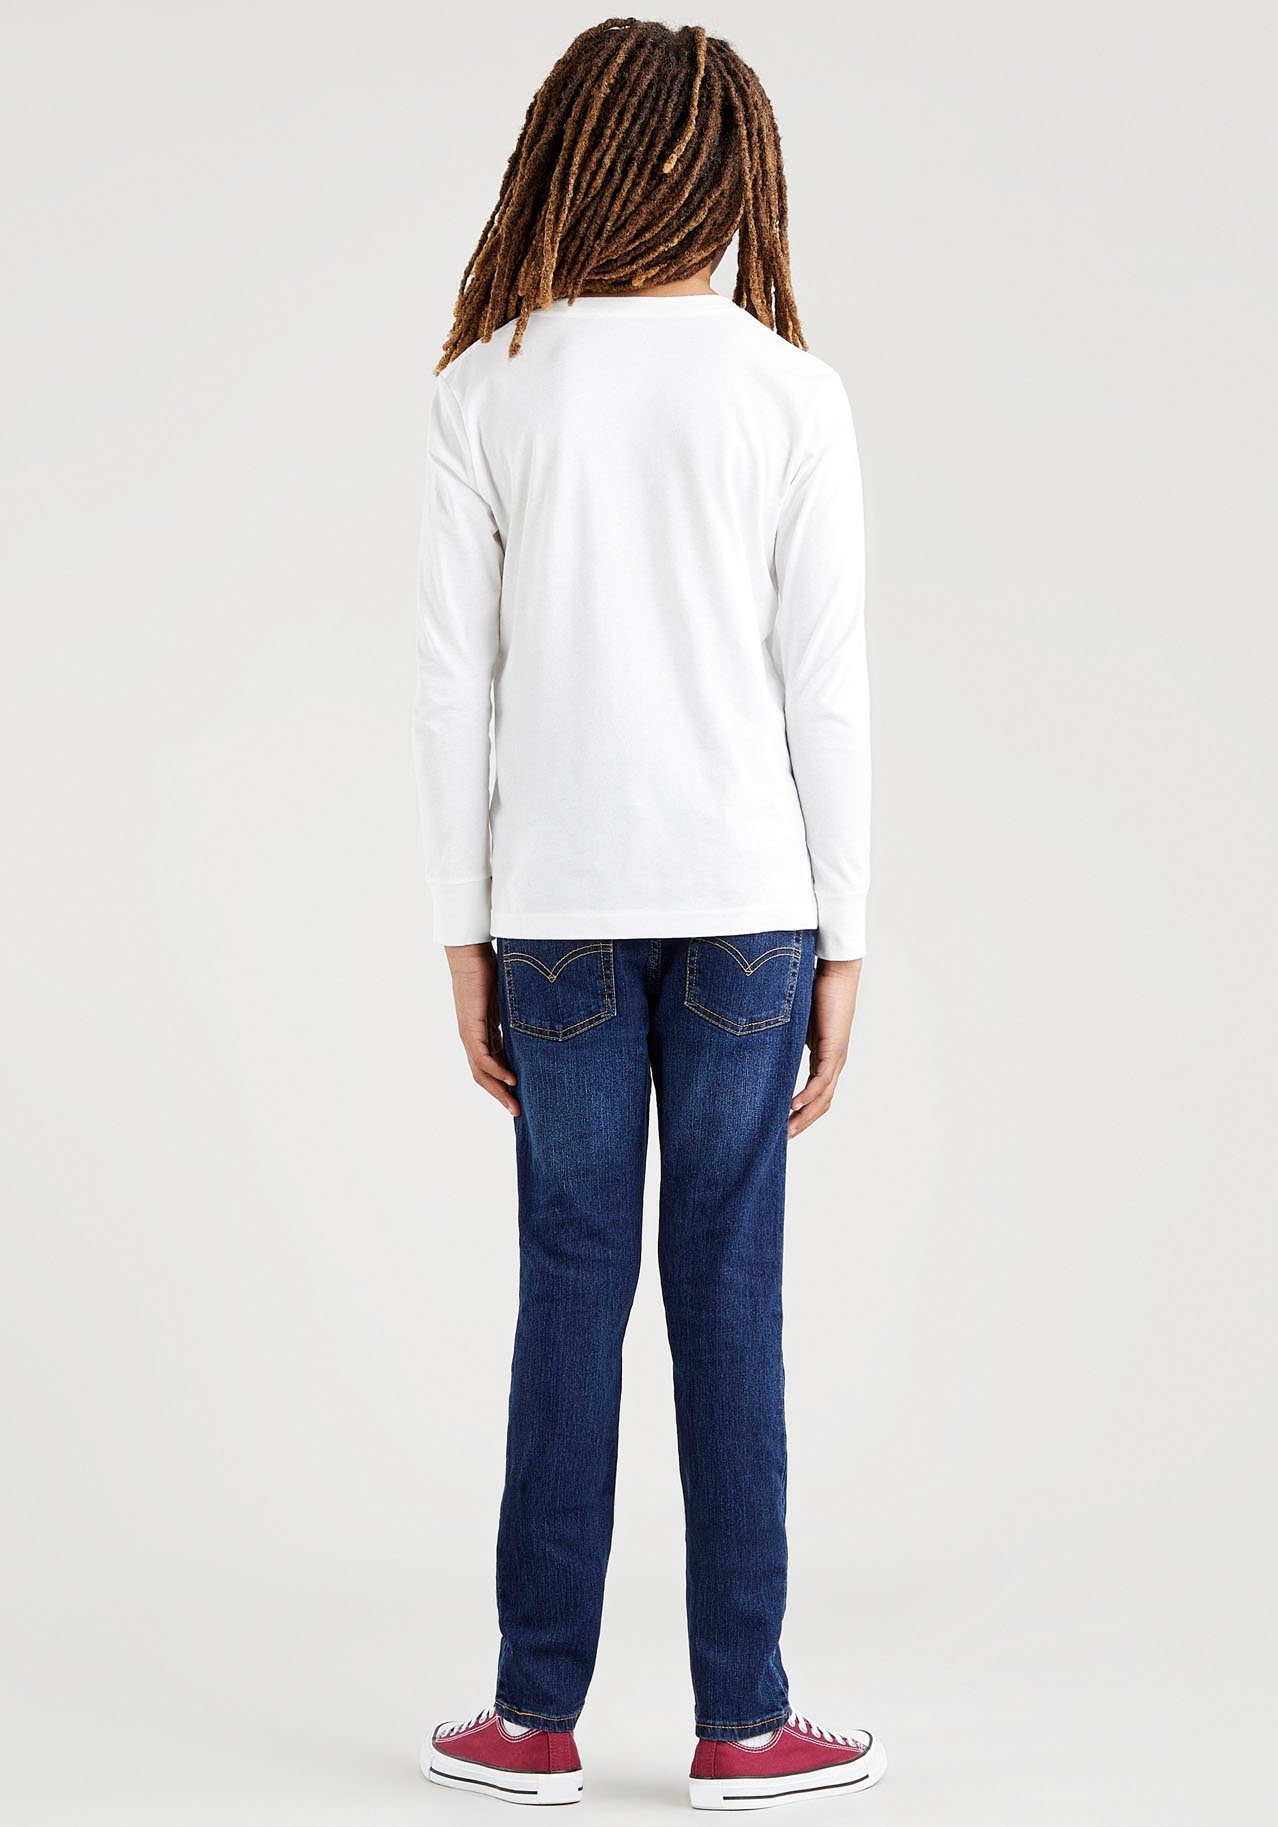 for BATWING Langarmshirt Kids weiß BOYS TEE CHESTHIT L/S Levi's®